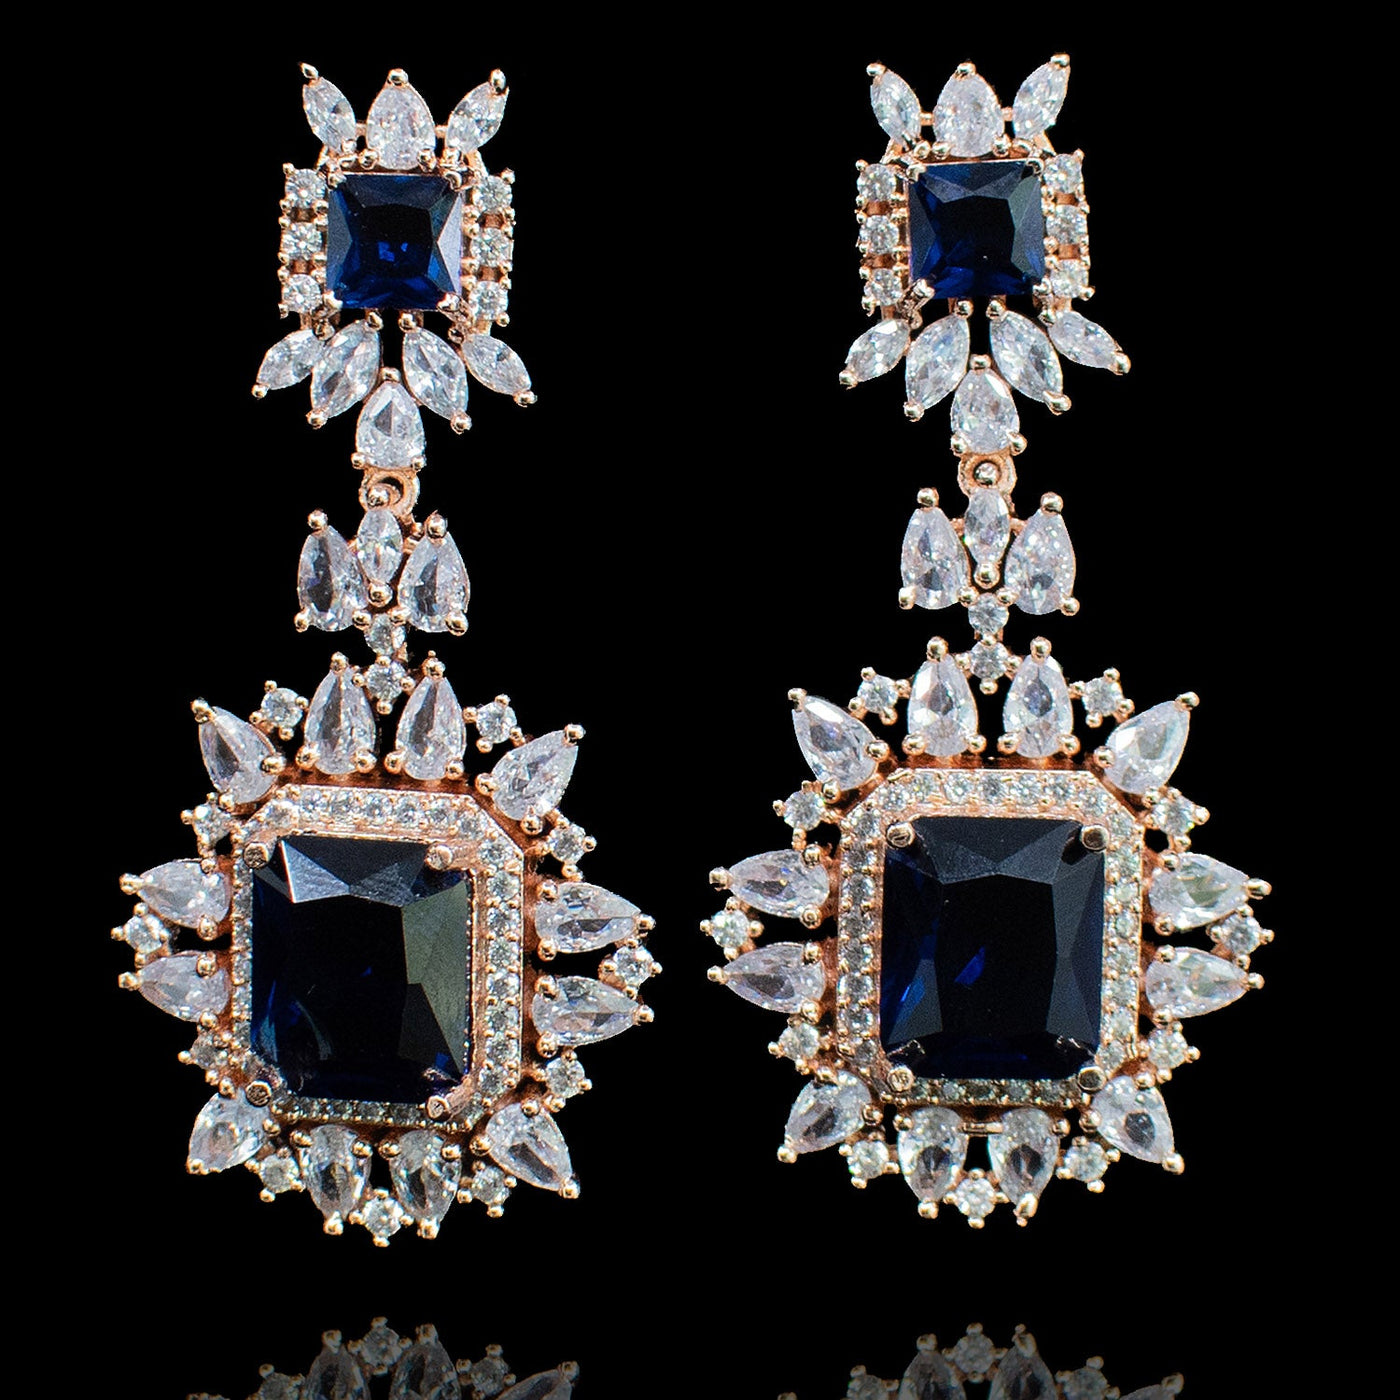 Almina Set Sapphire - Available in 3 Options